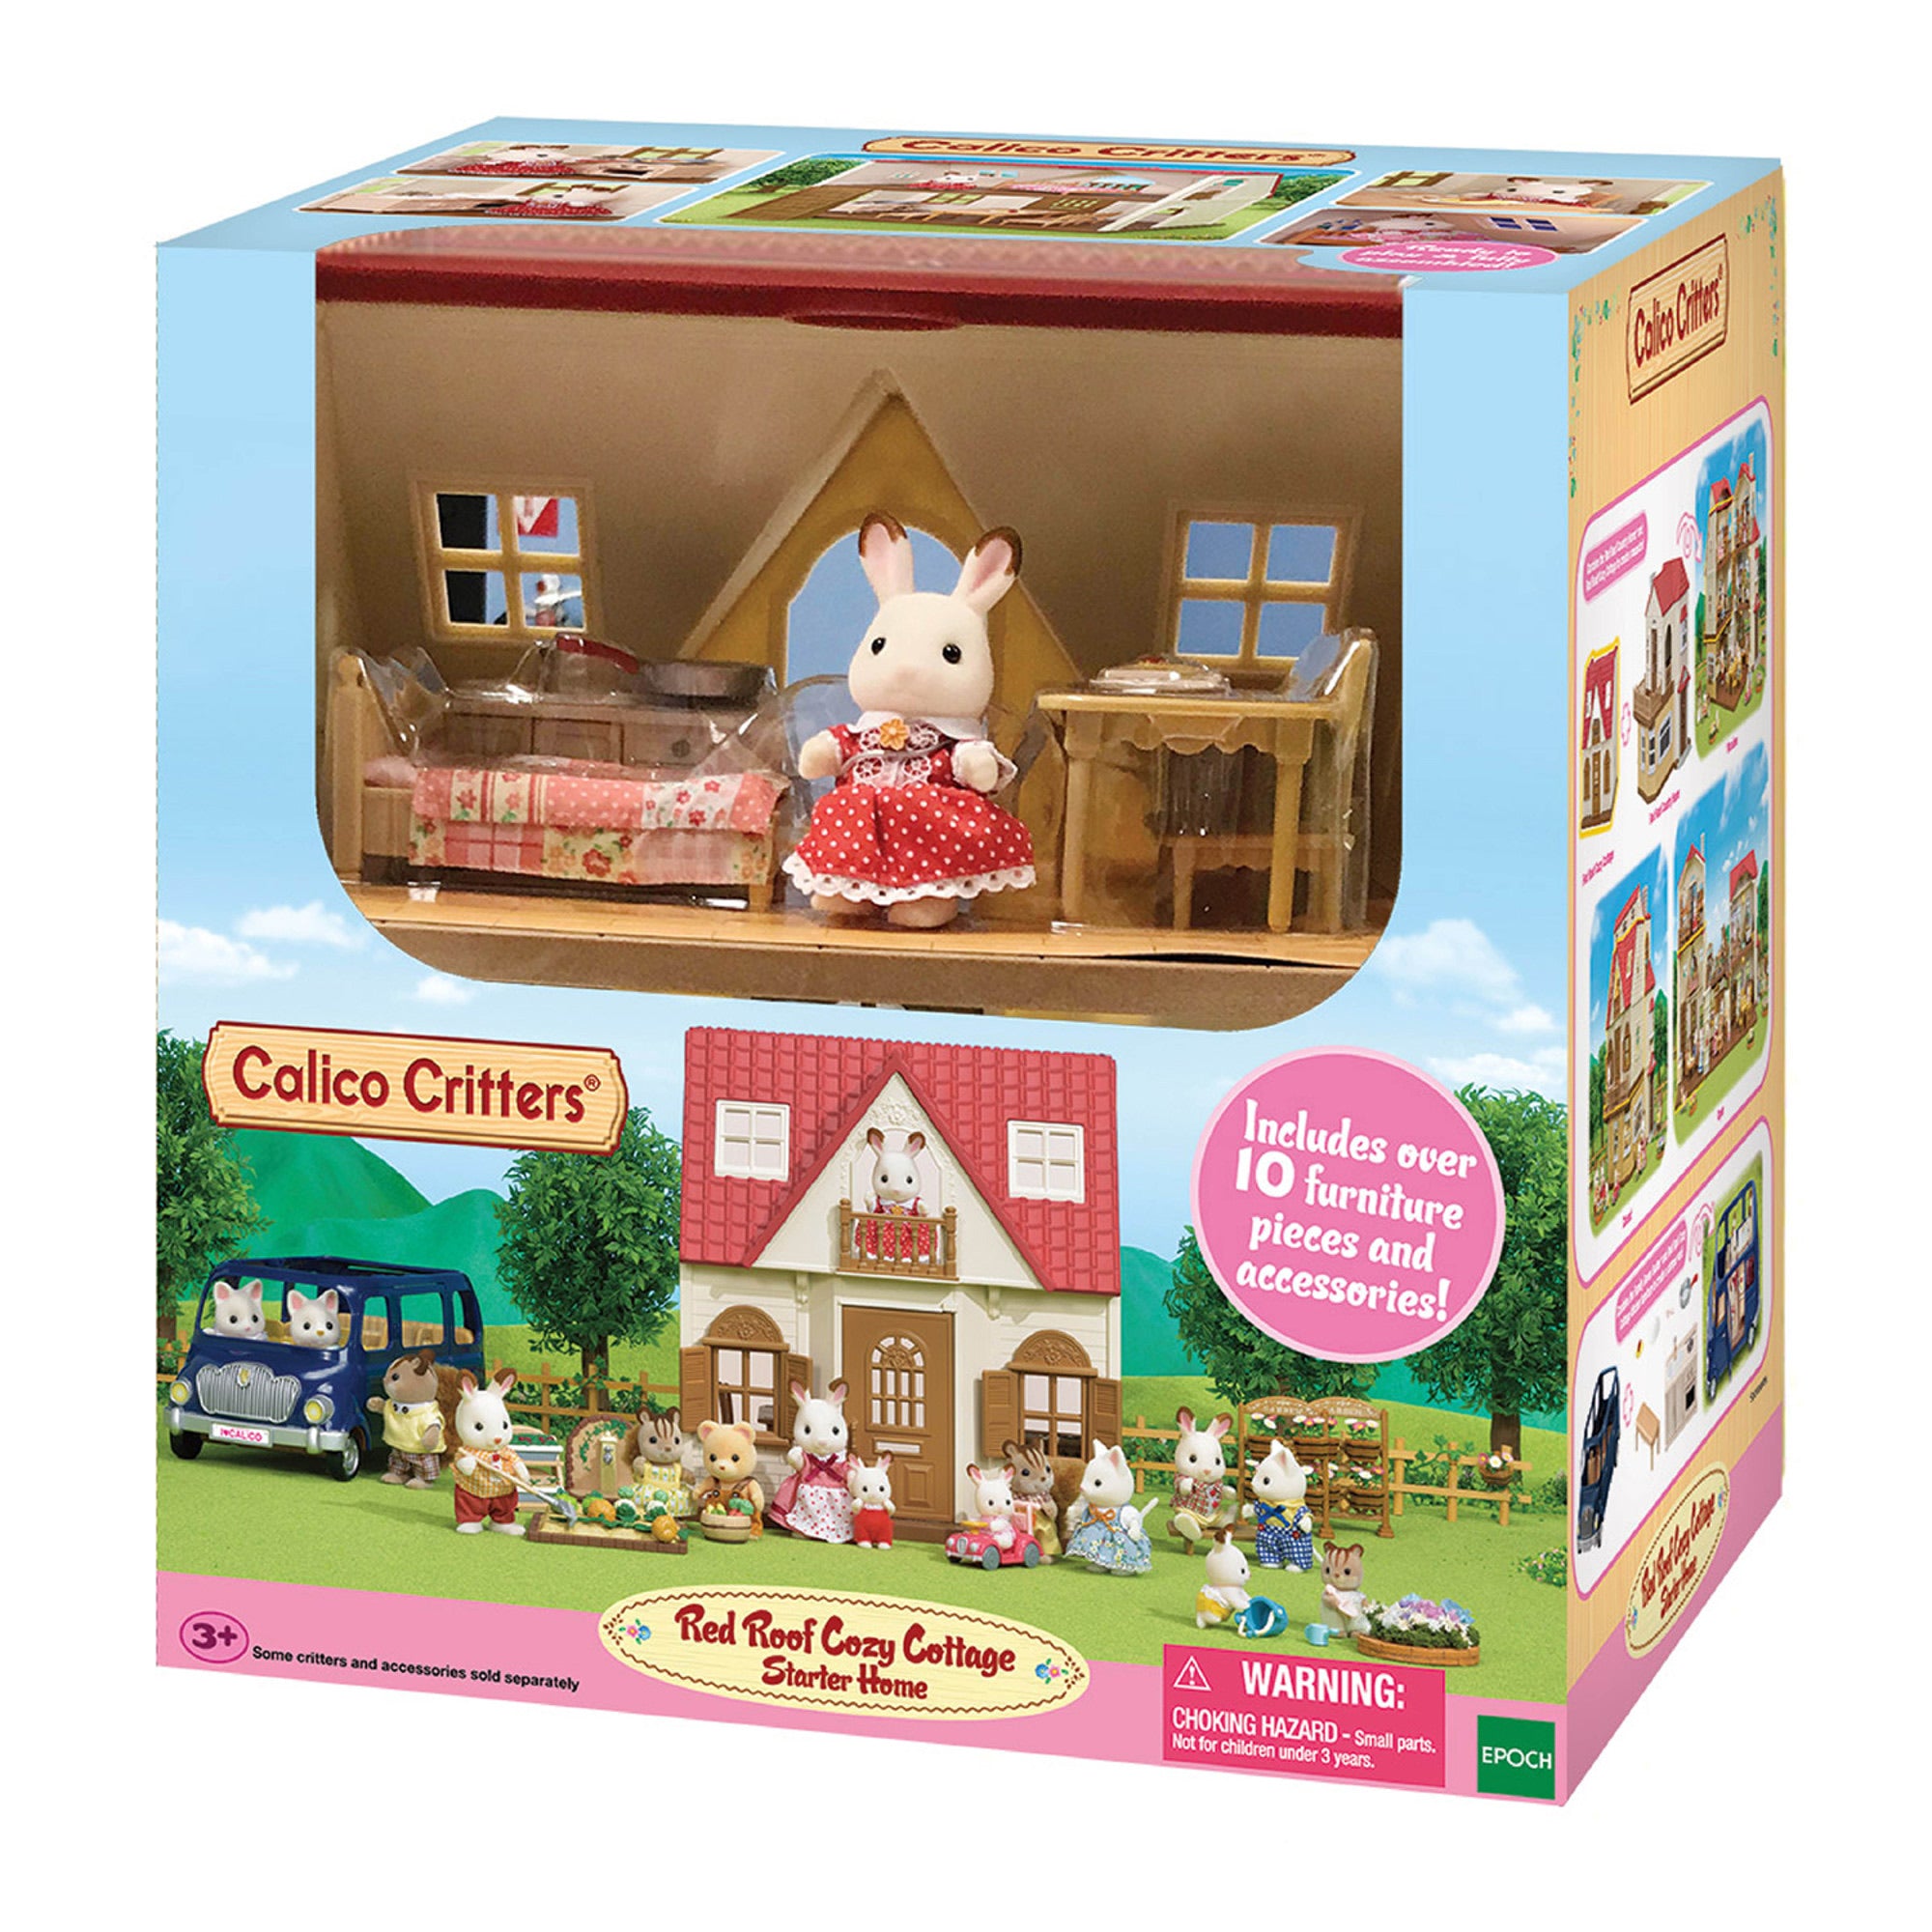 Red Roof Cozy Cottage Starter Home by Calico Critters #CC1798